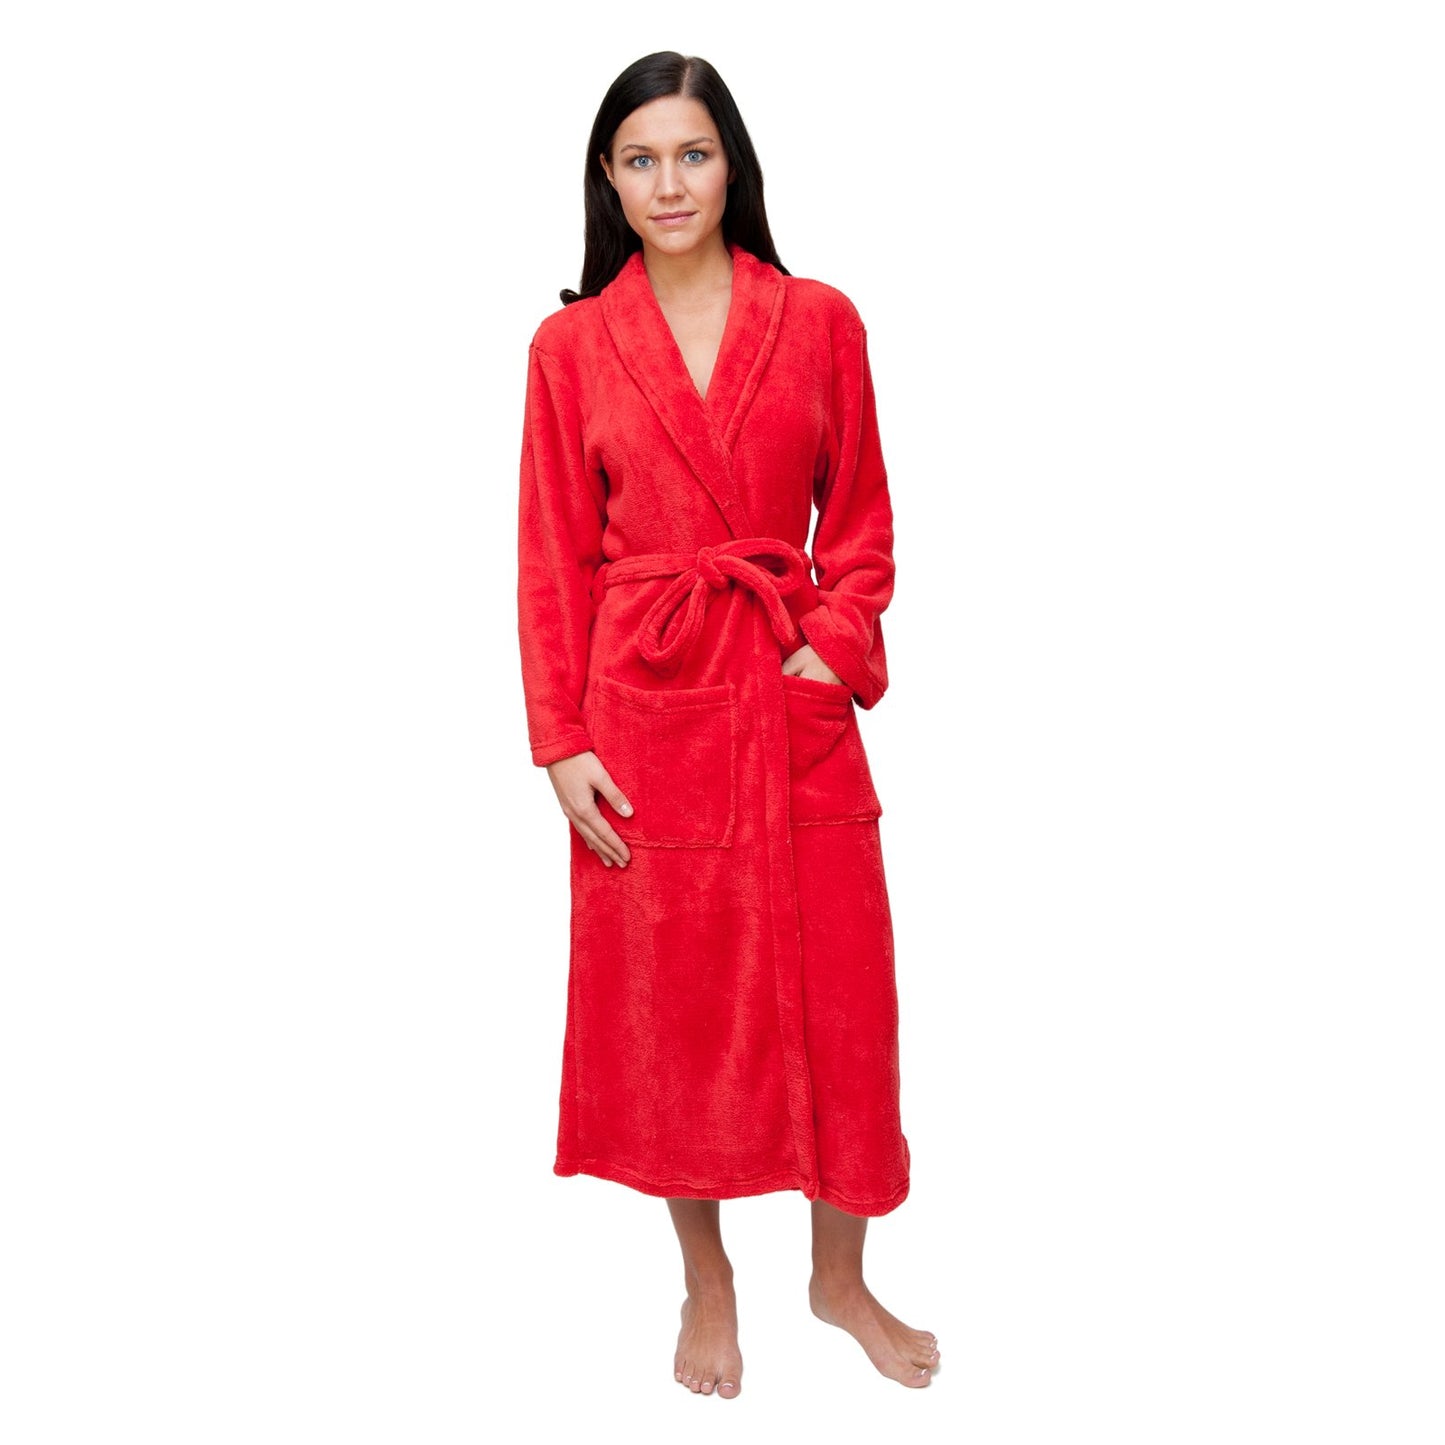 Robes for Valentine's Day